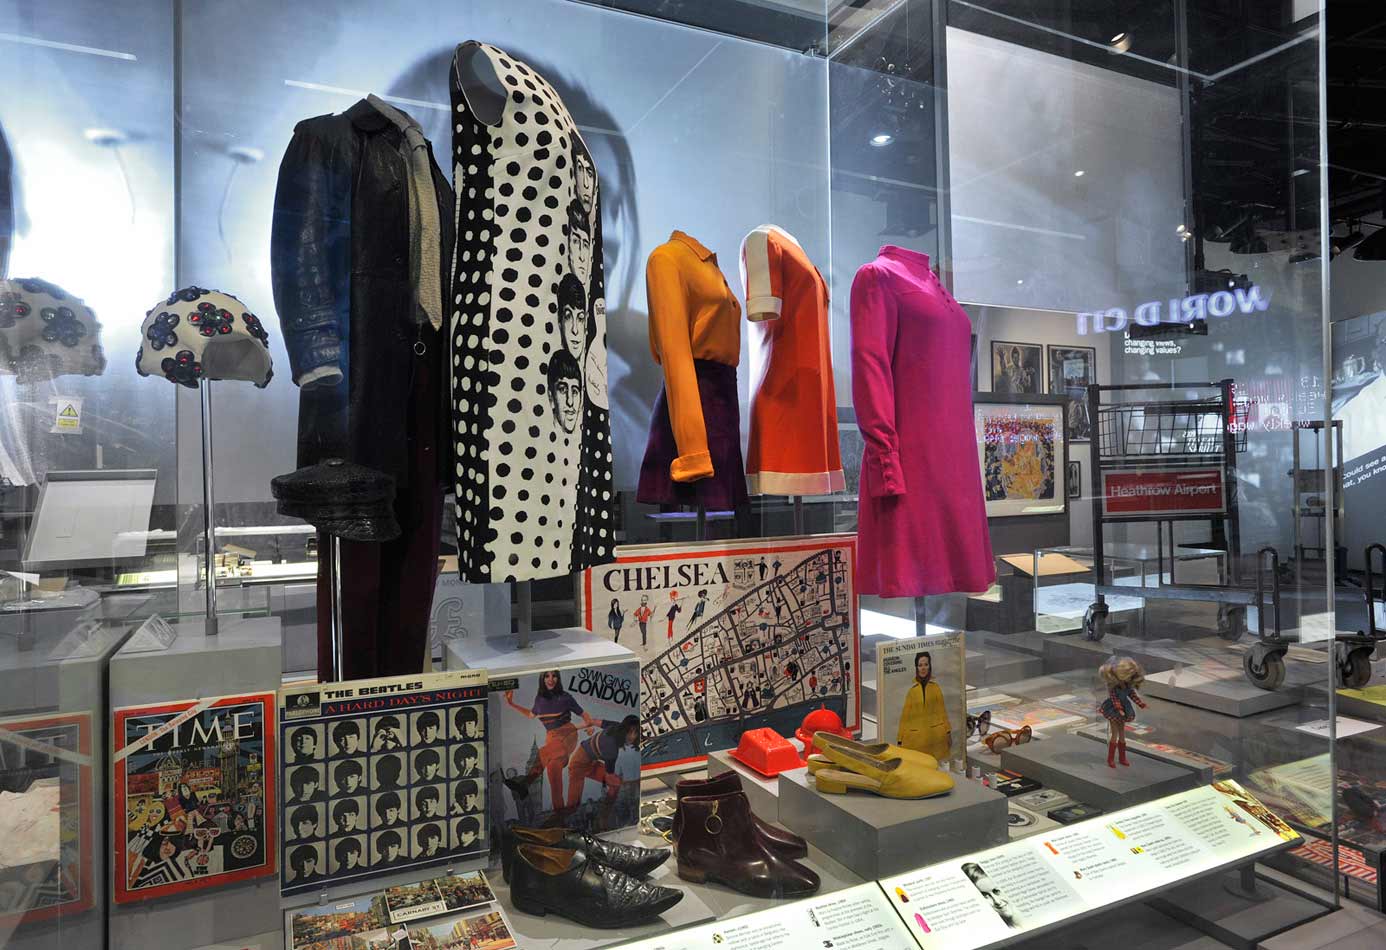 Case illustrating London fashions of the 1960s.